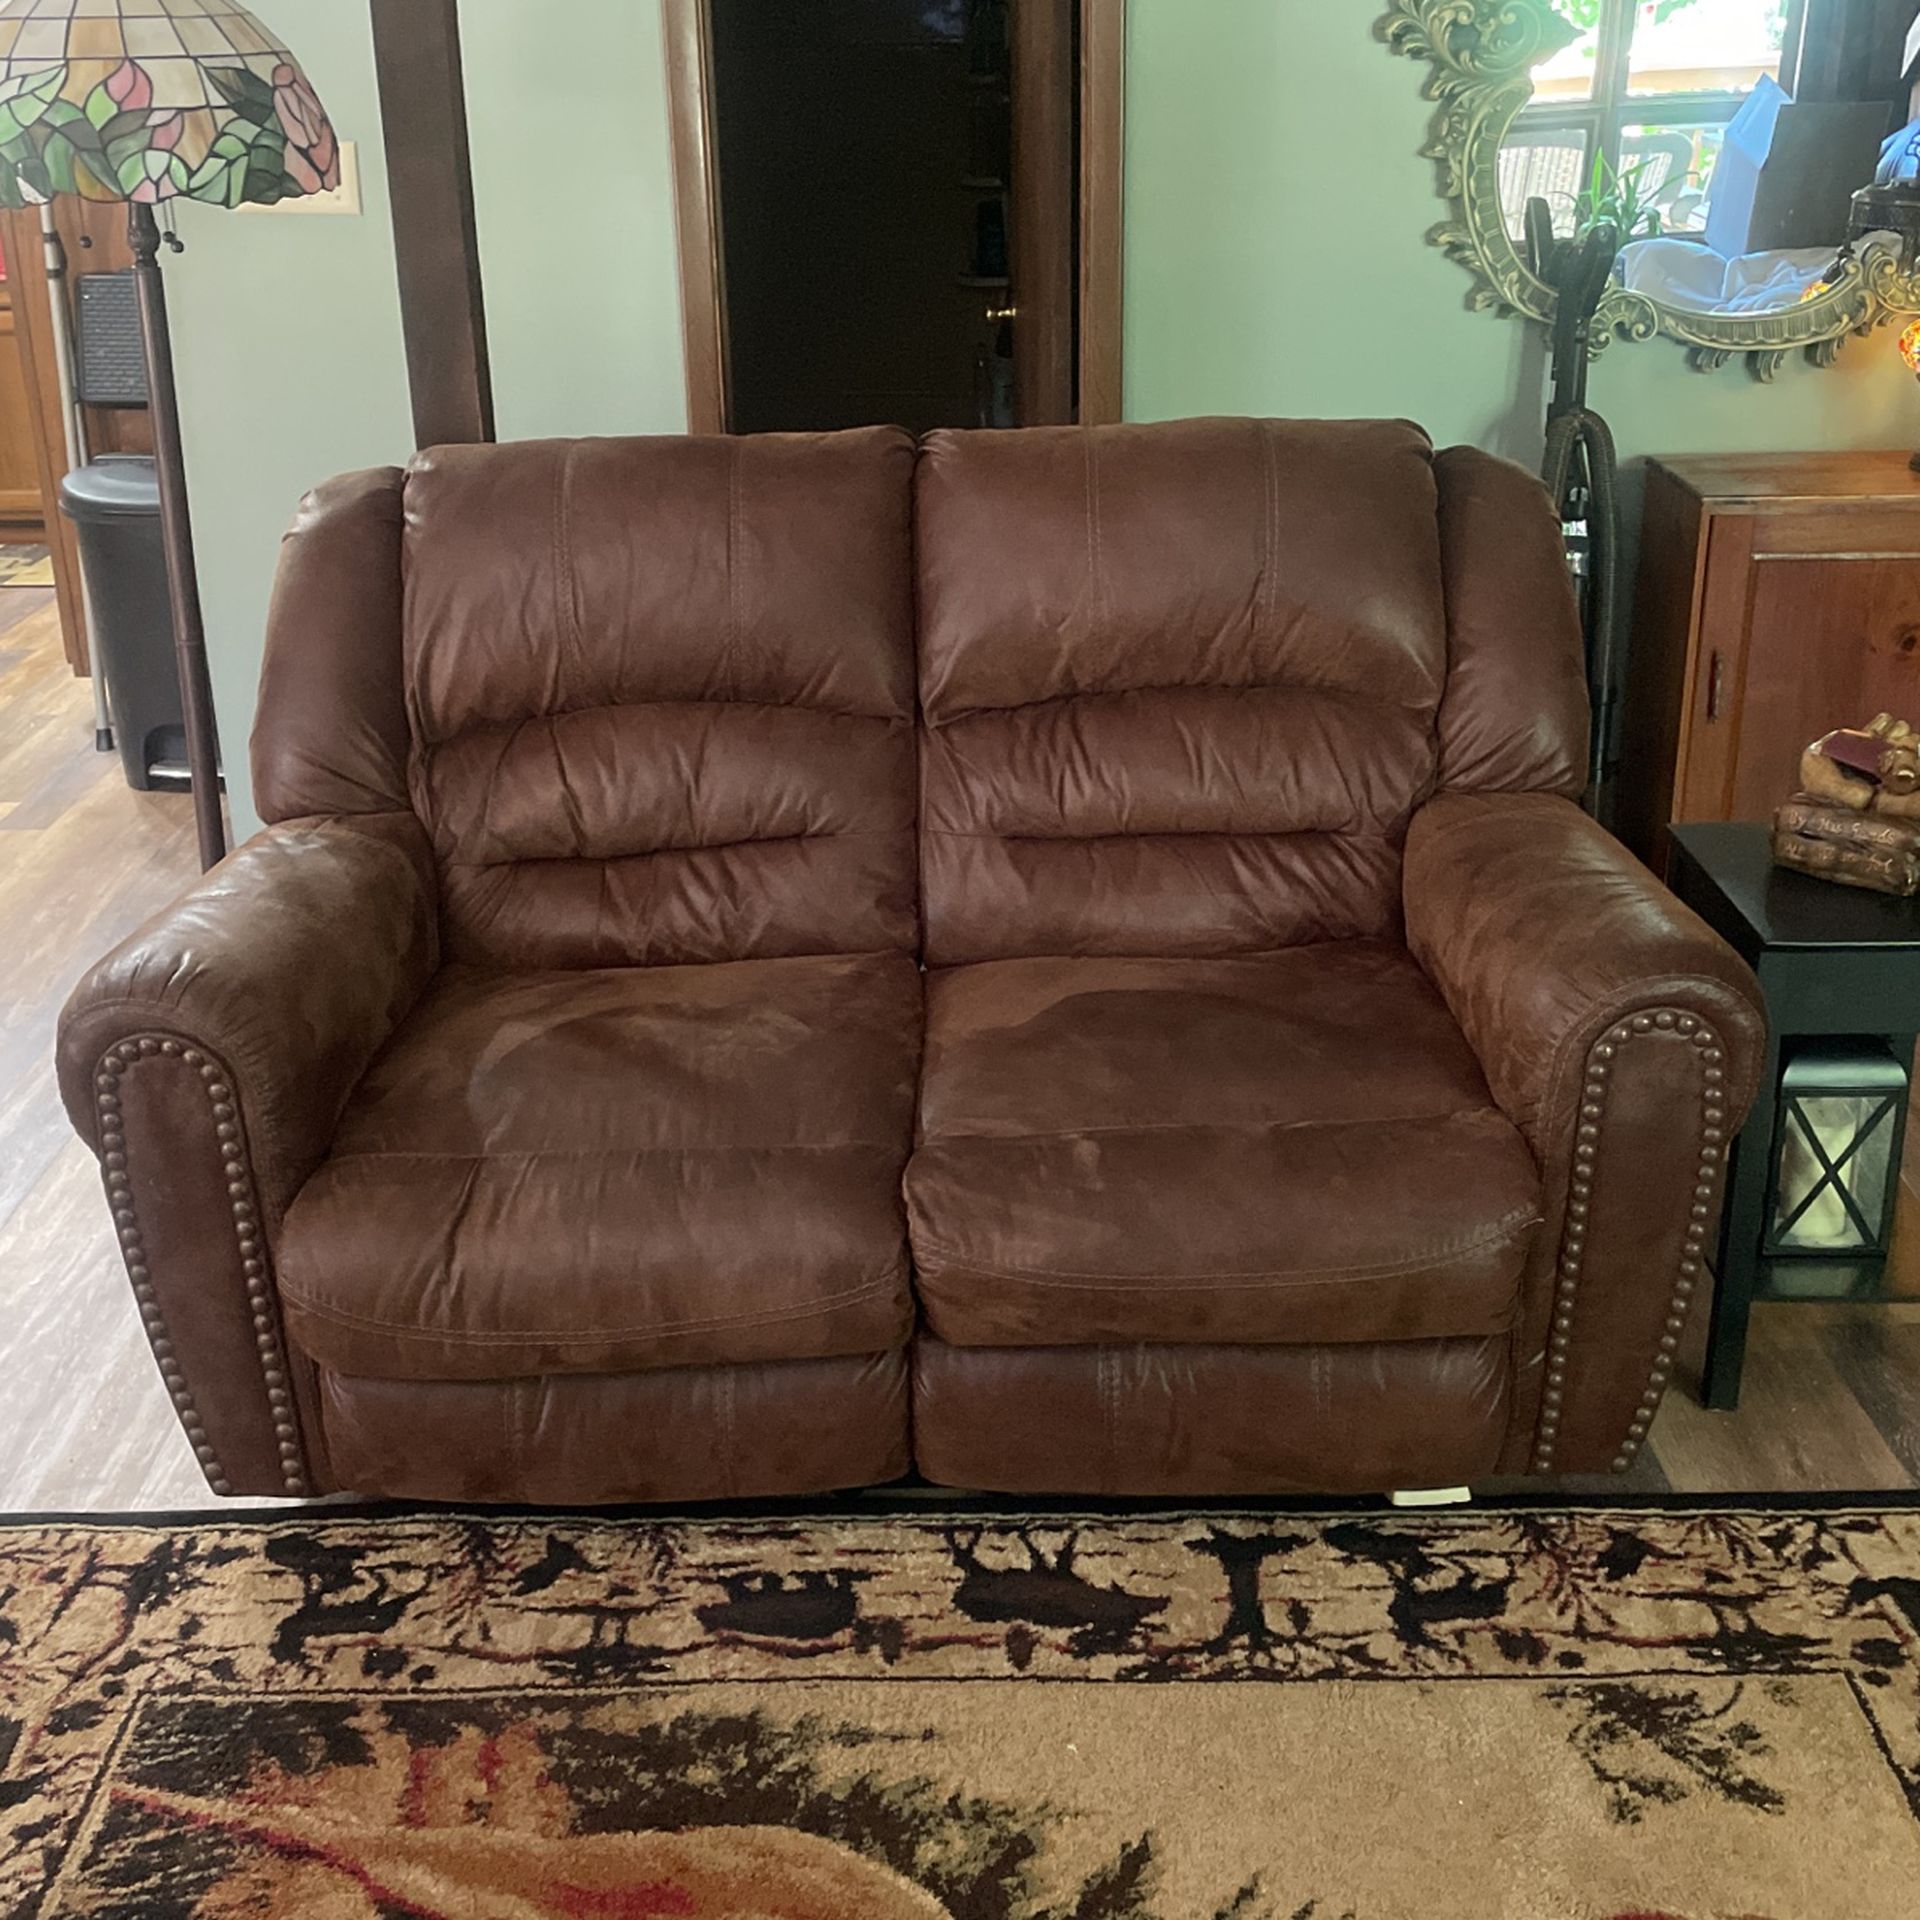 Four Electric Recliner Love And Sofa/Couch 